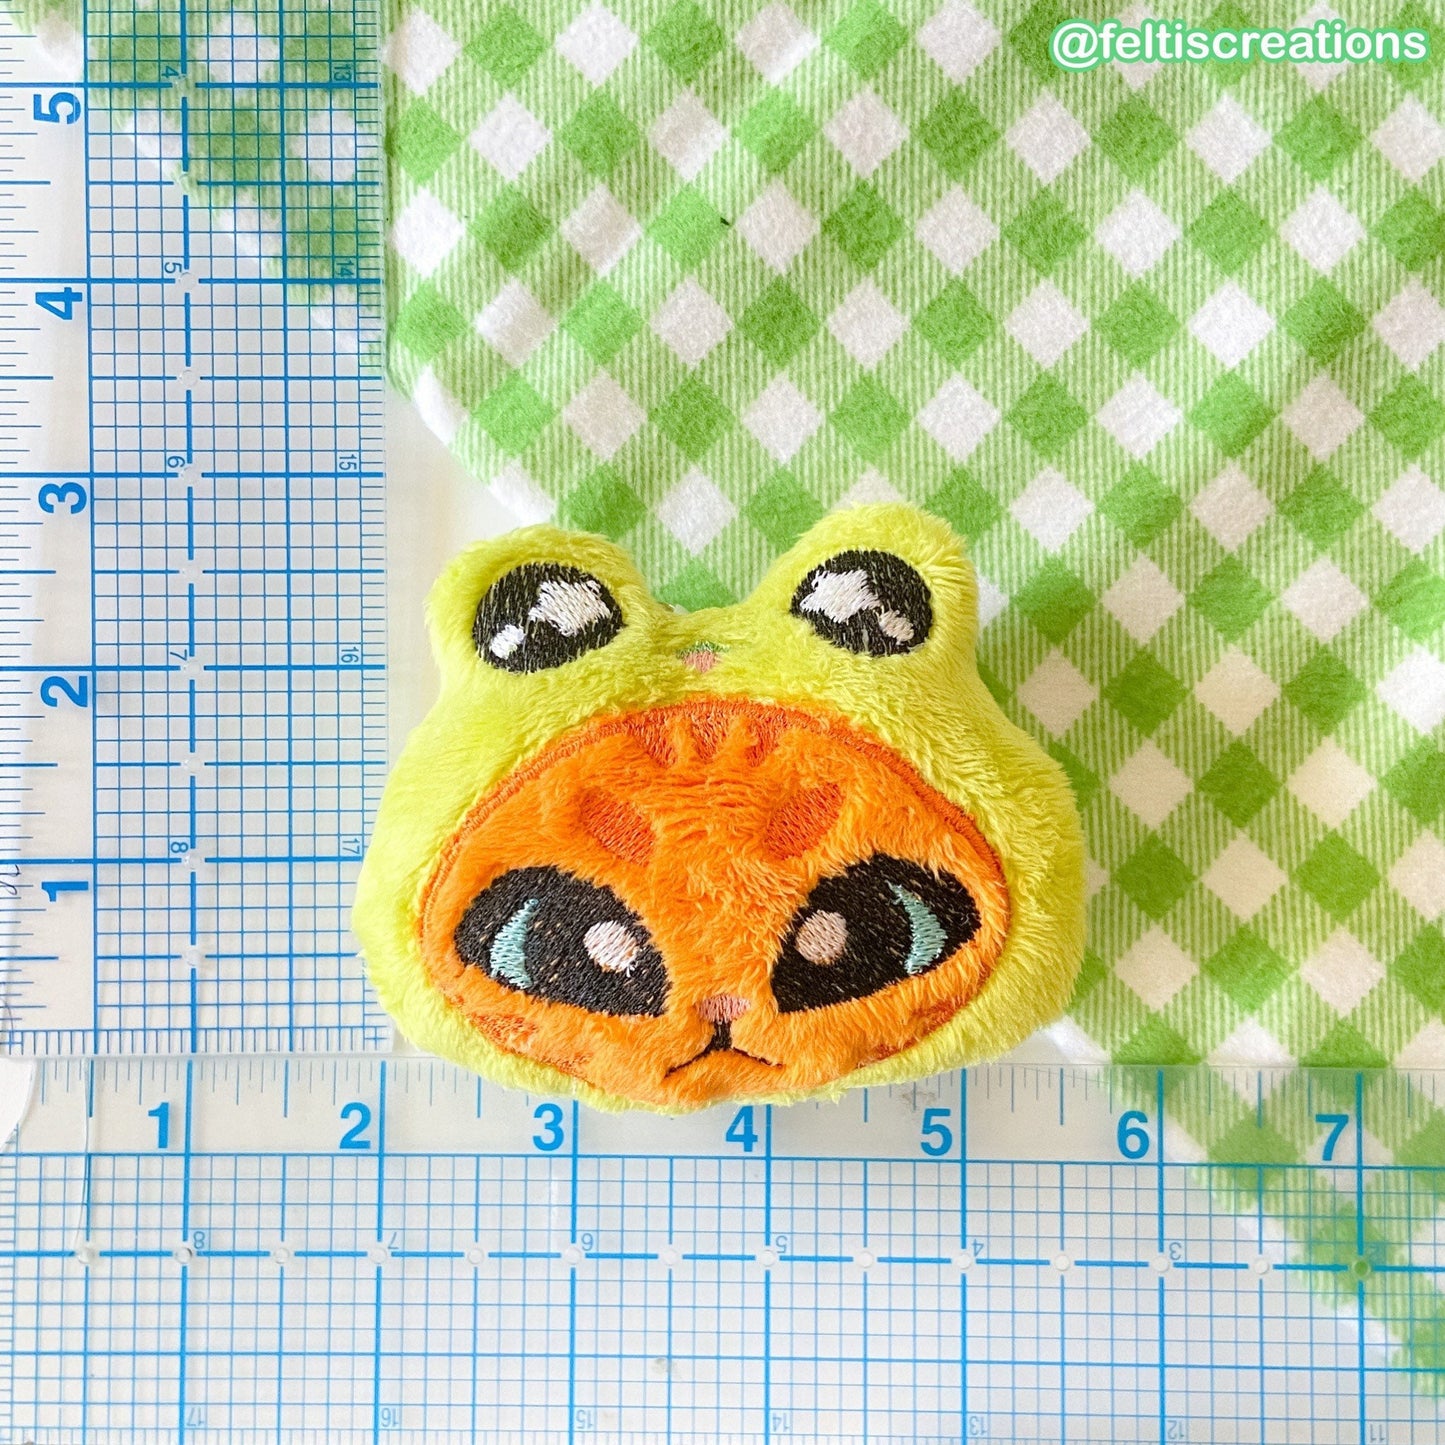 Purin the Frog Cat Plush Keychain